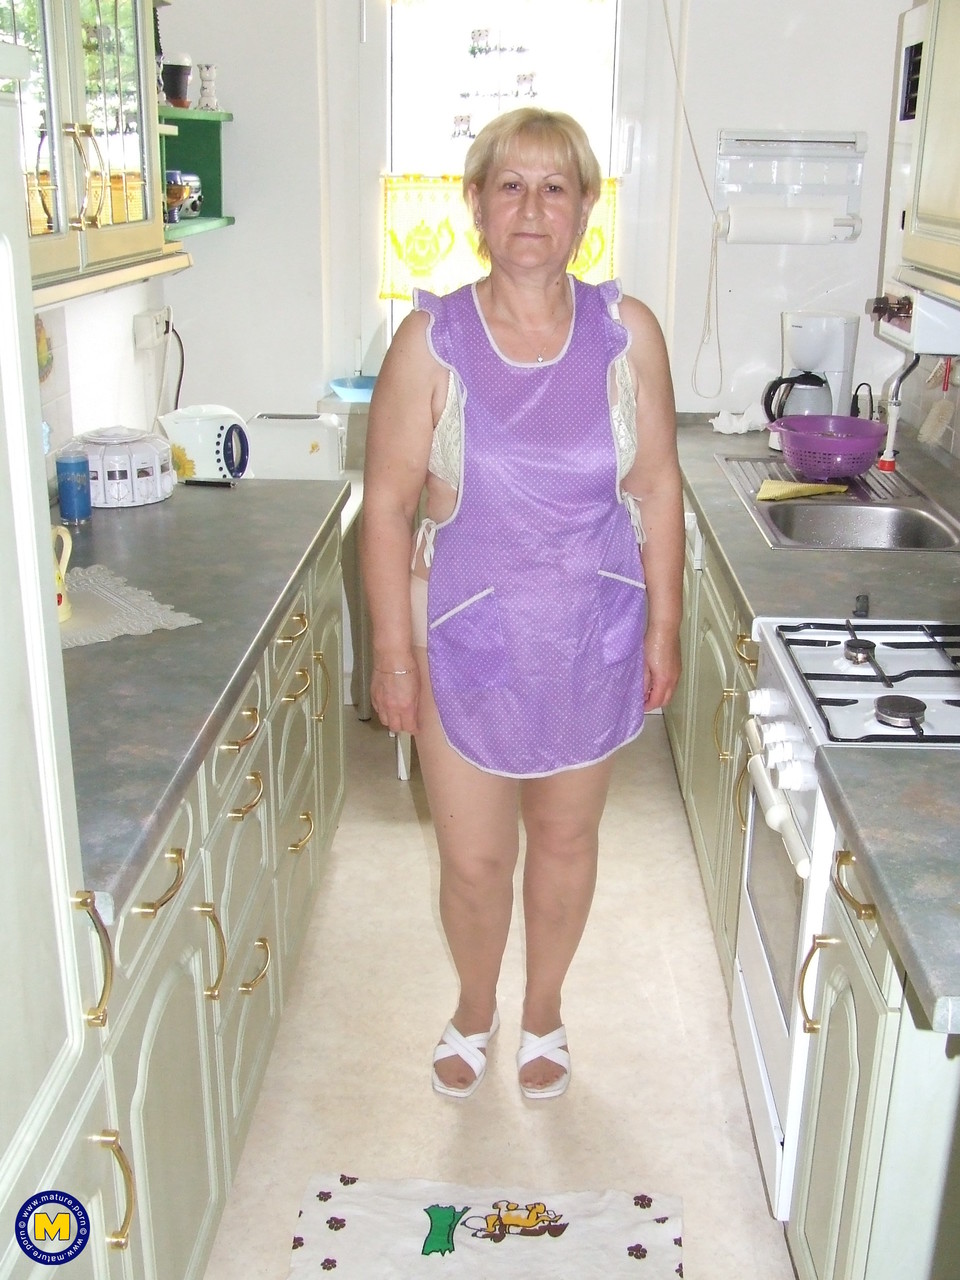 Short haired German cleaning lady Dagmar shows her mature cunt in the kitchen porn photo #425226956